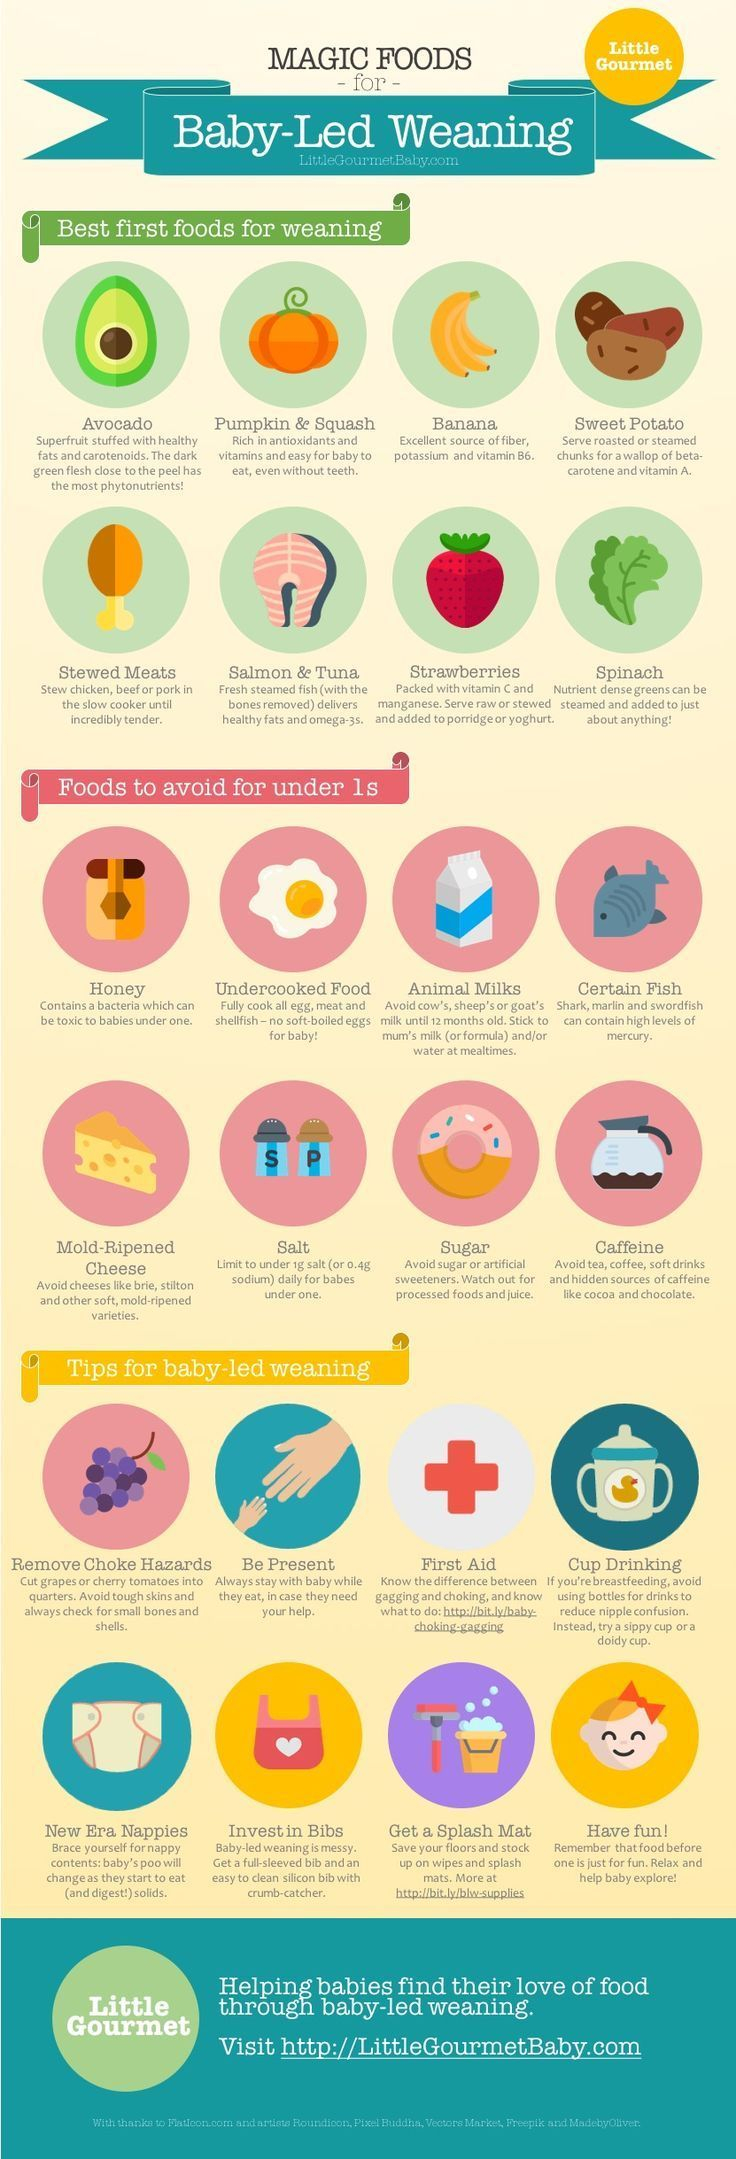 Best First Foods Foods To Avoid BLW Tips INFOGRAPHIC 